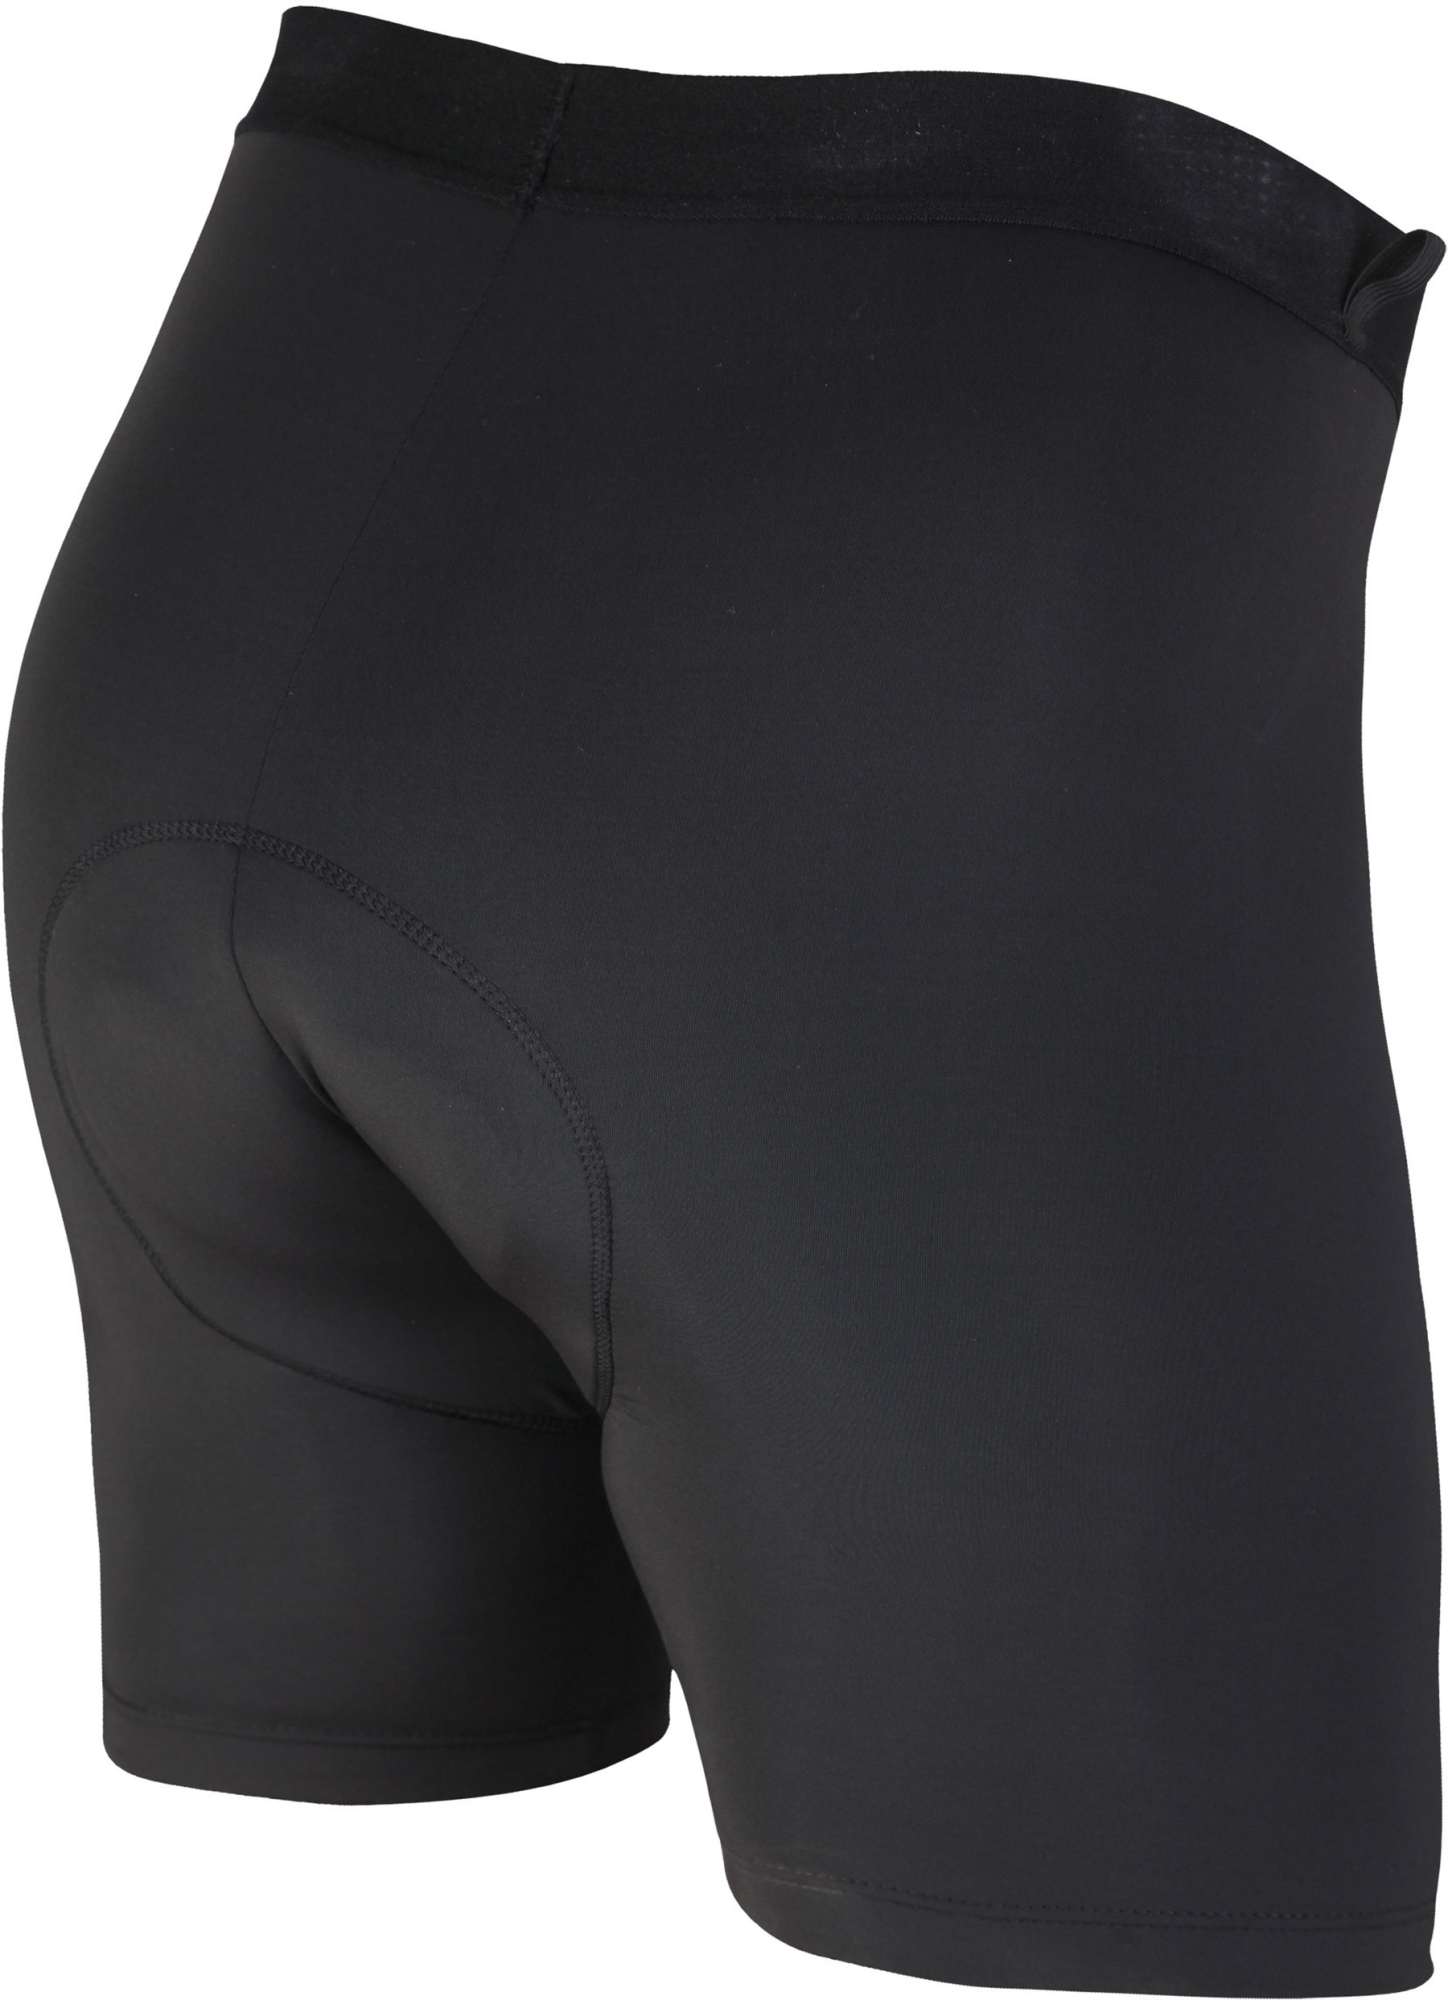 Women’s cycling tights